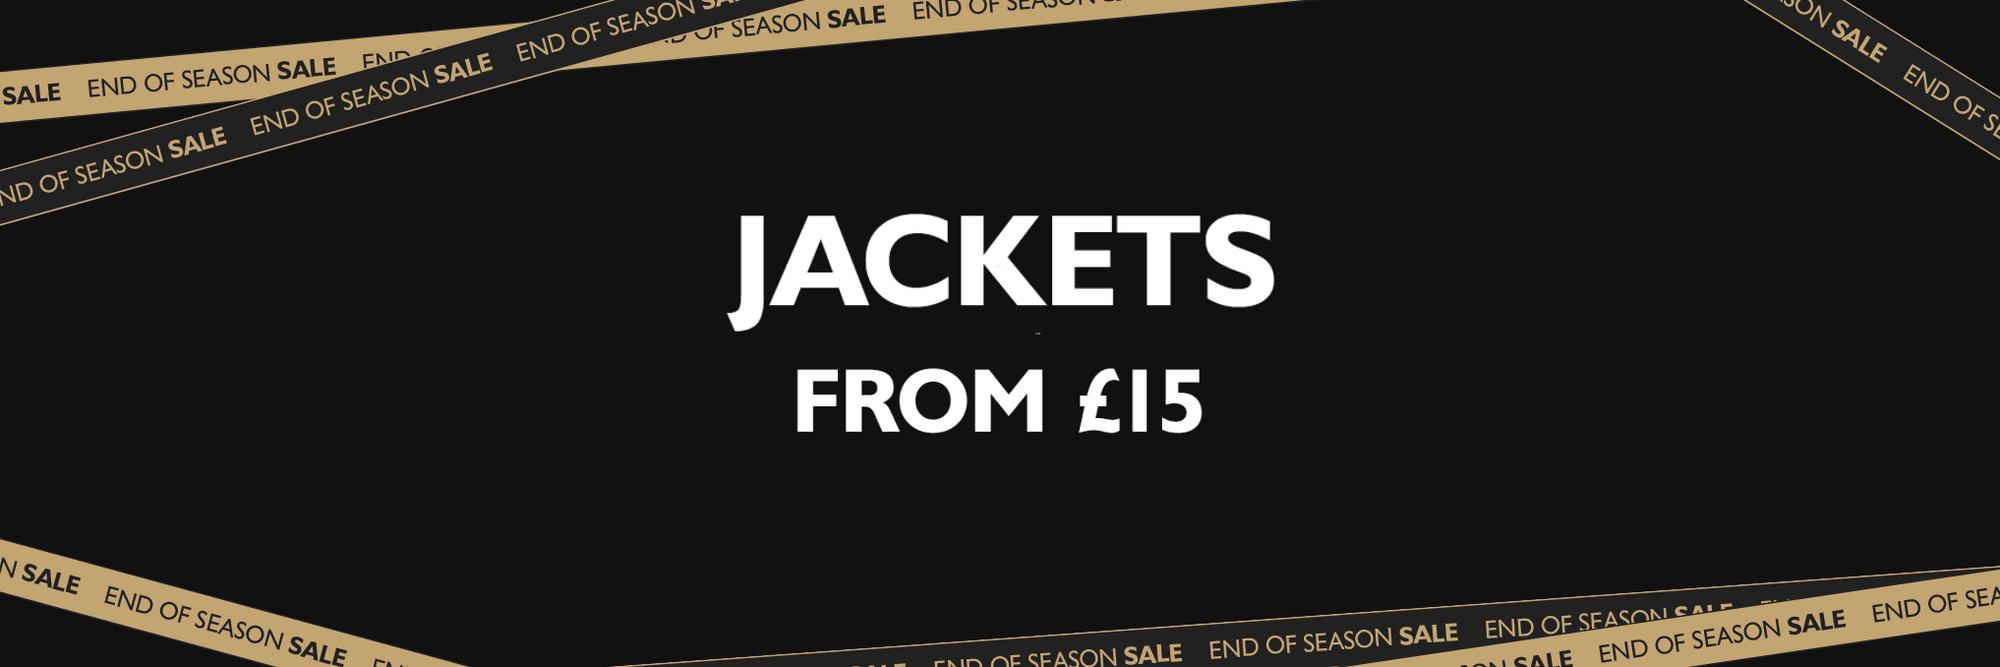 23/24 End of Season Sale - Jackets and 1/4 Zips from £20